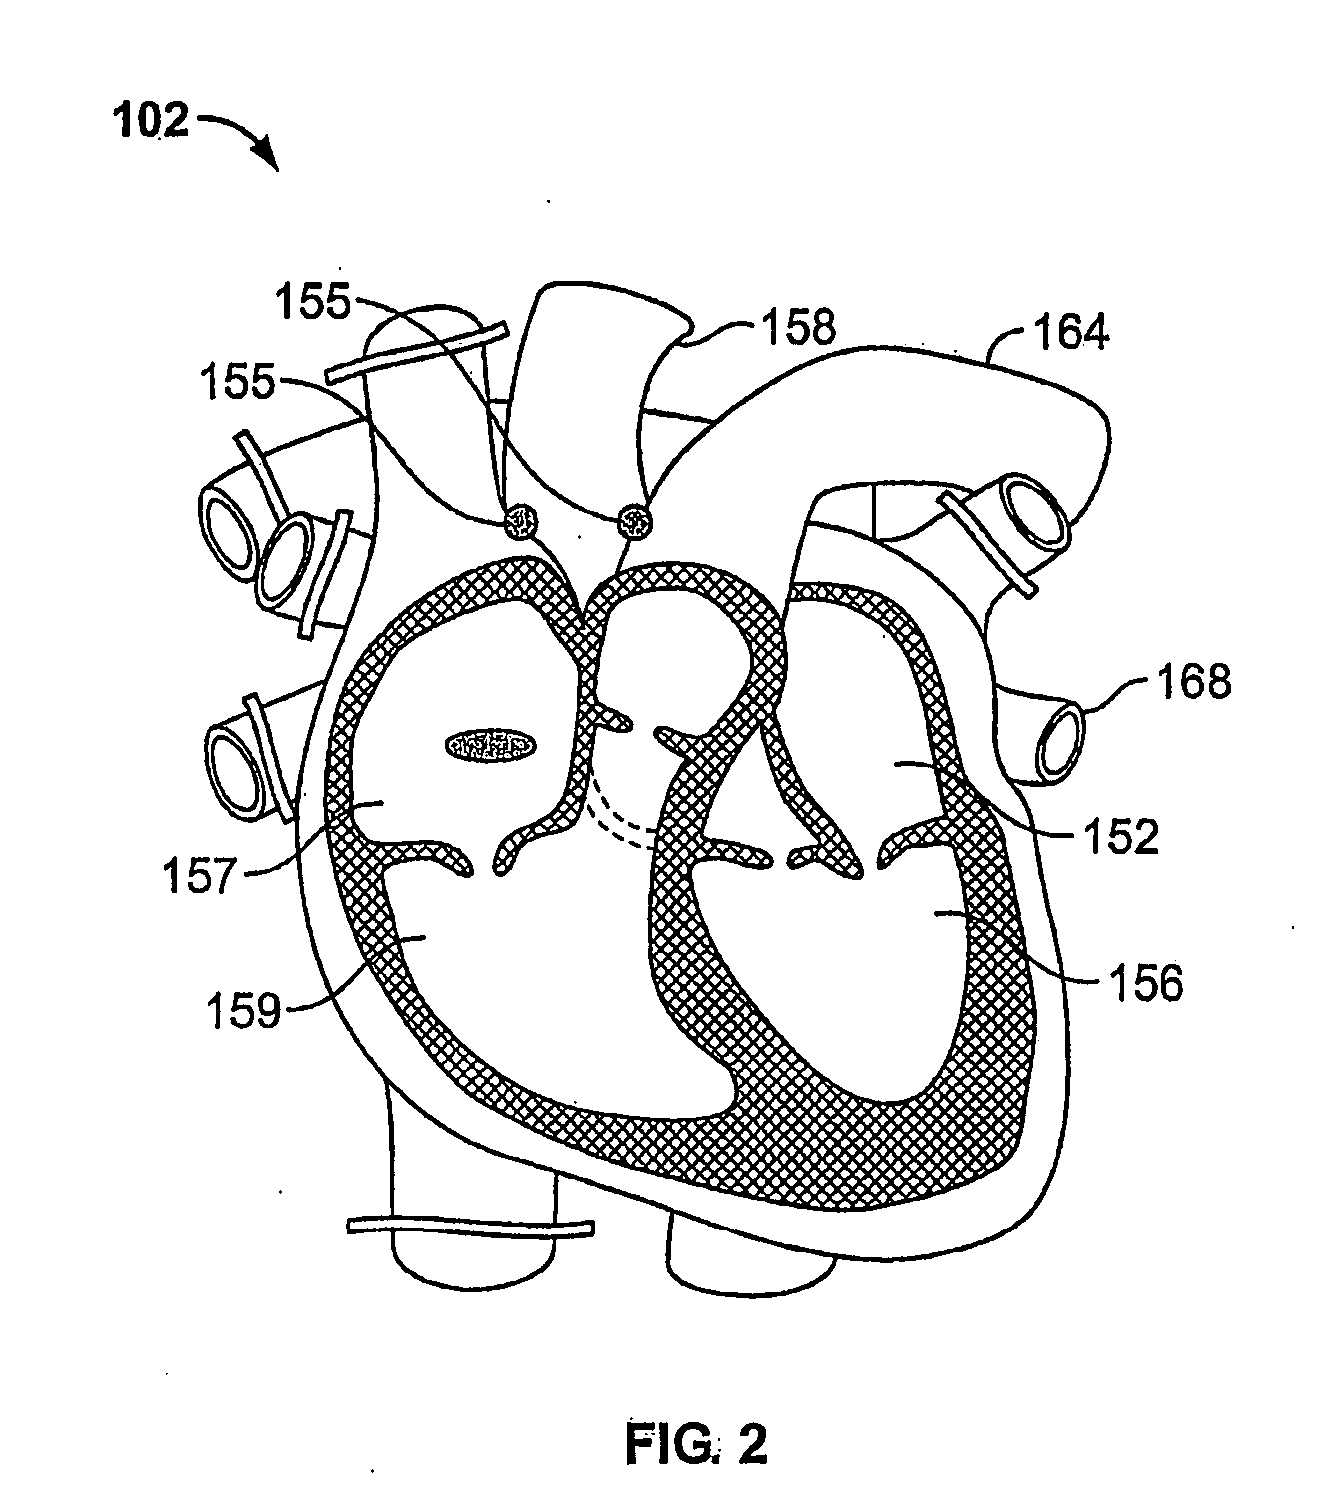 Systems and methods for ex vivo organ care